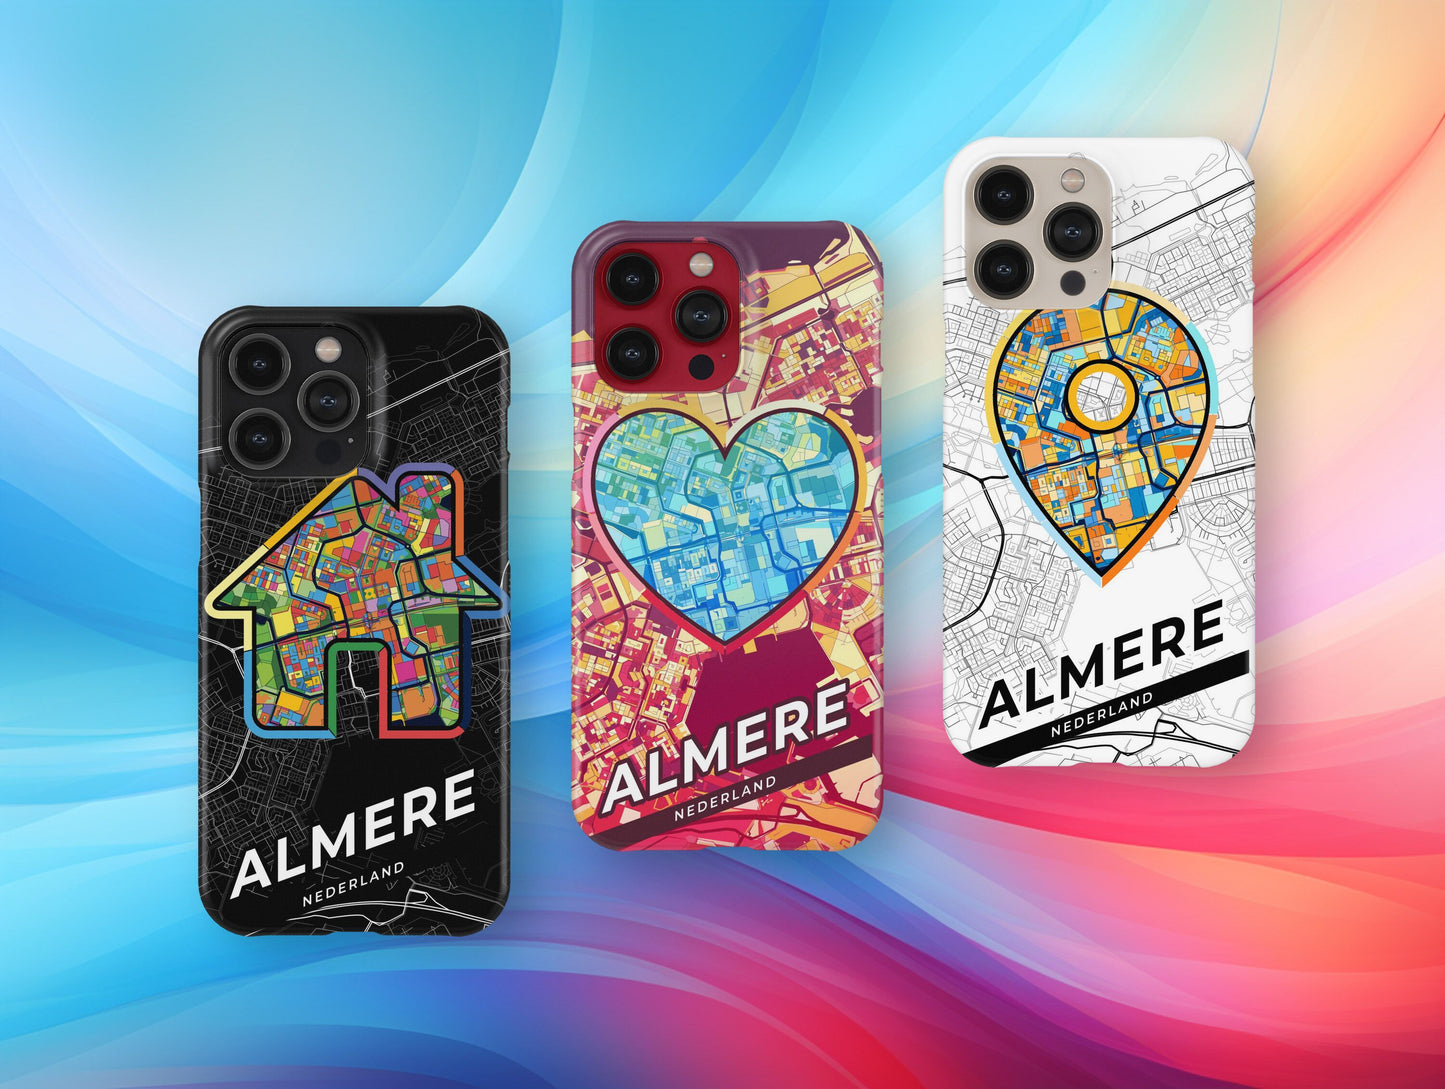 Almere Netherlands slim phone case with colorful icon. Birthday, wedding or housewarming gift. Couple match cases.